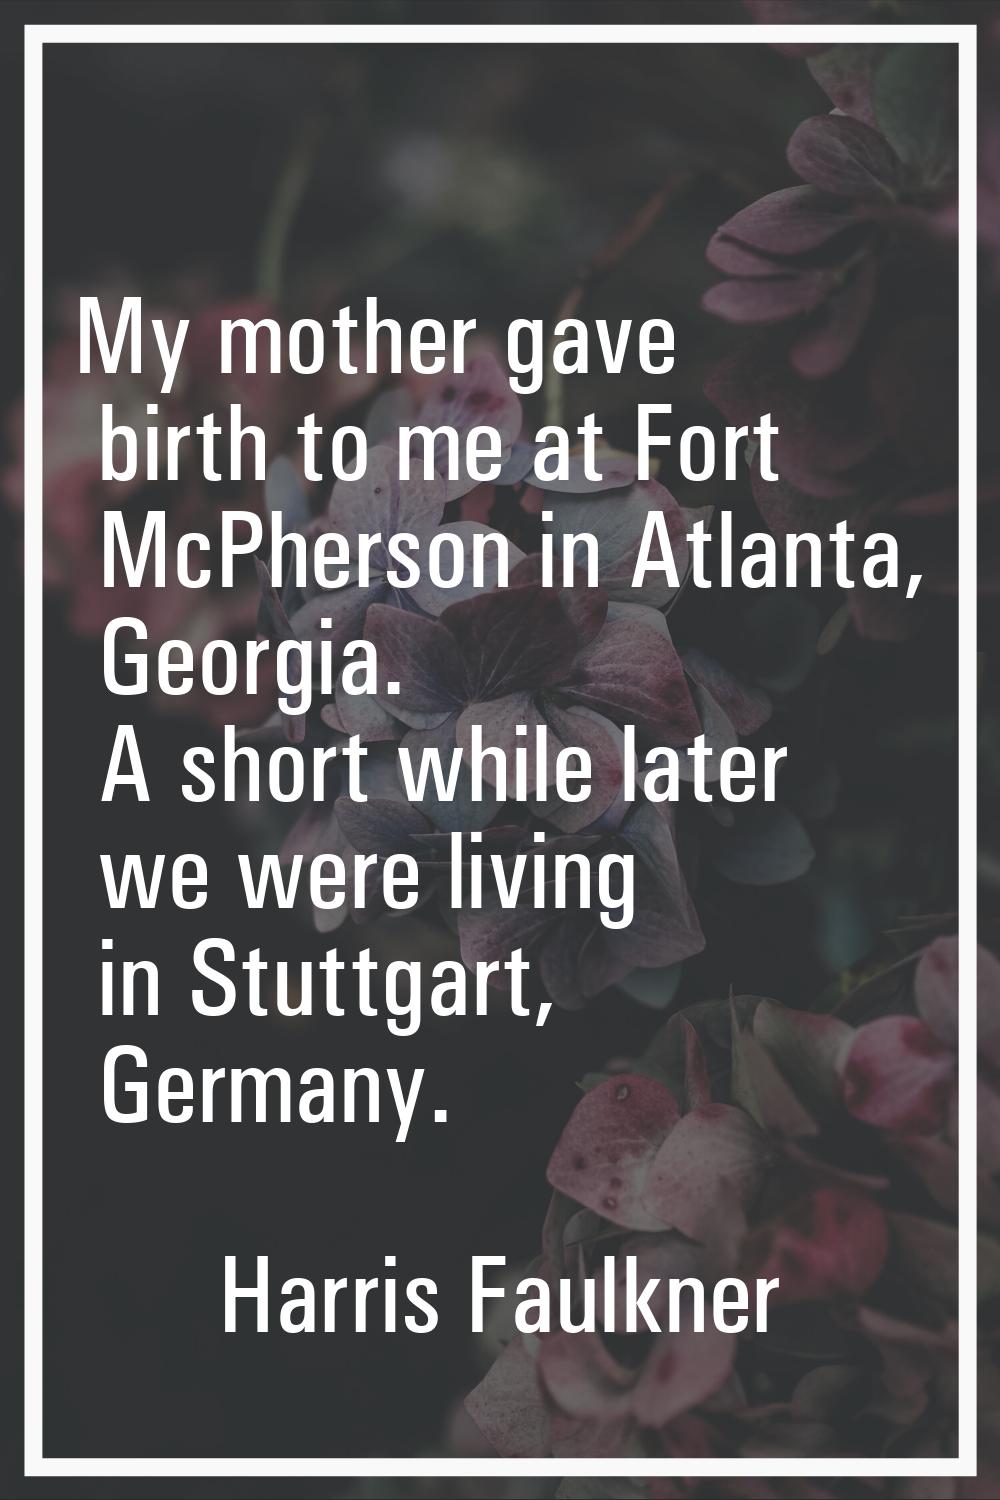 My mother gave birth to me at Fort McPherson in Atlanta, Georgia. A short while later we were livin